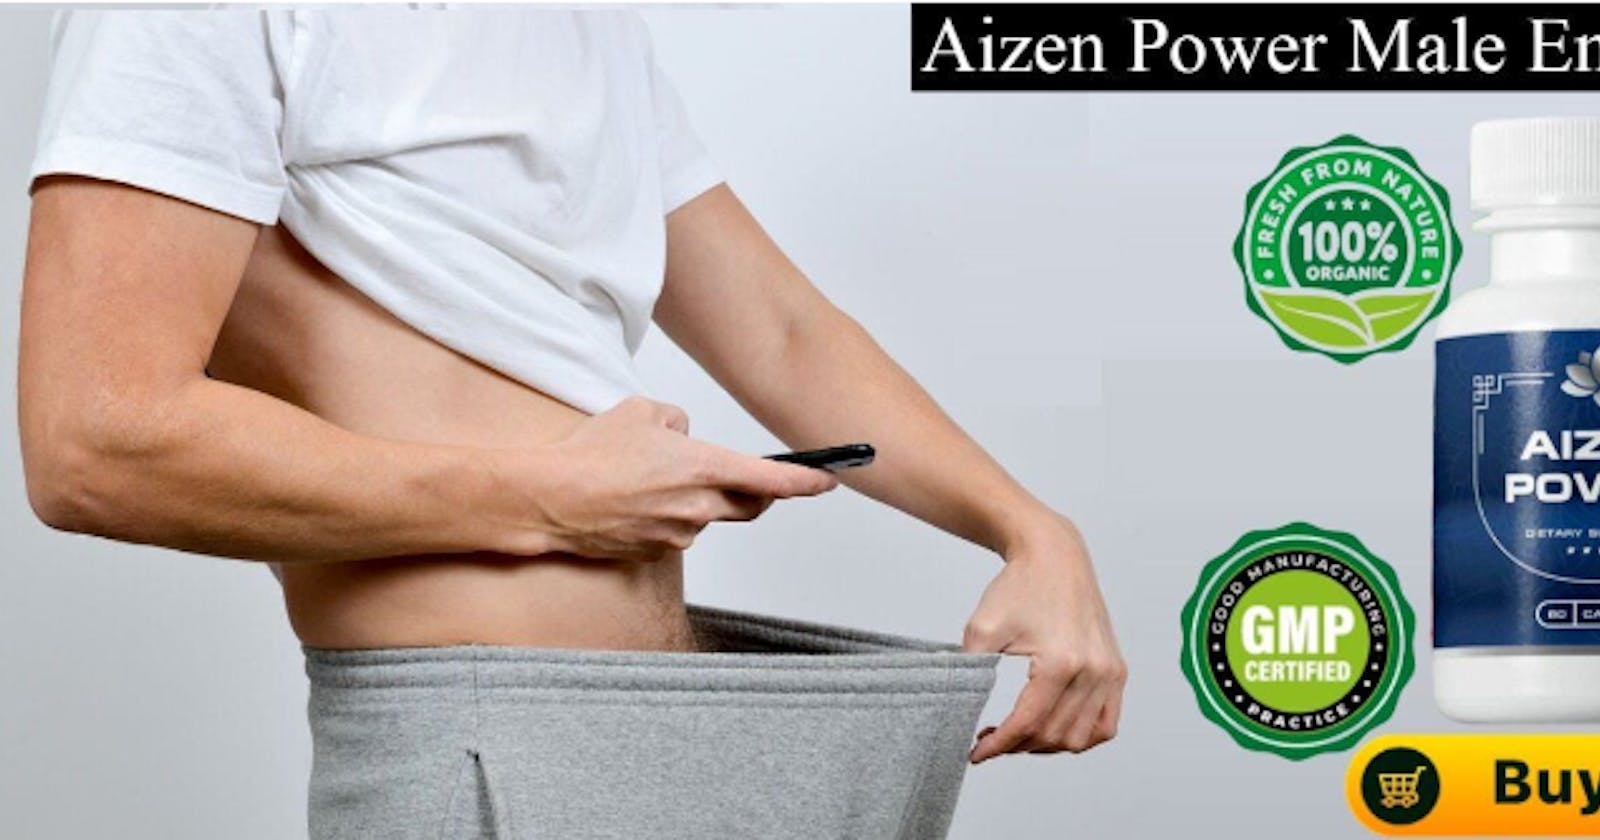 Aizen Power Male Enhancement Reviews & Shocking Ingredients Must Read Before Buying?